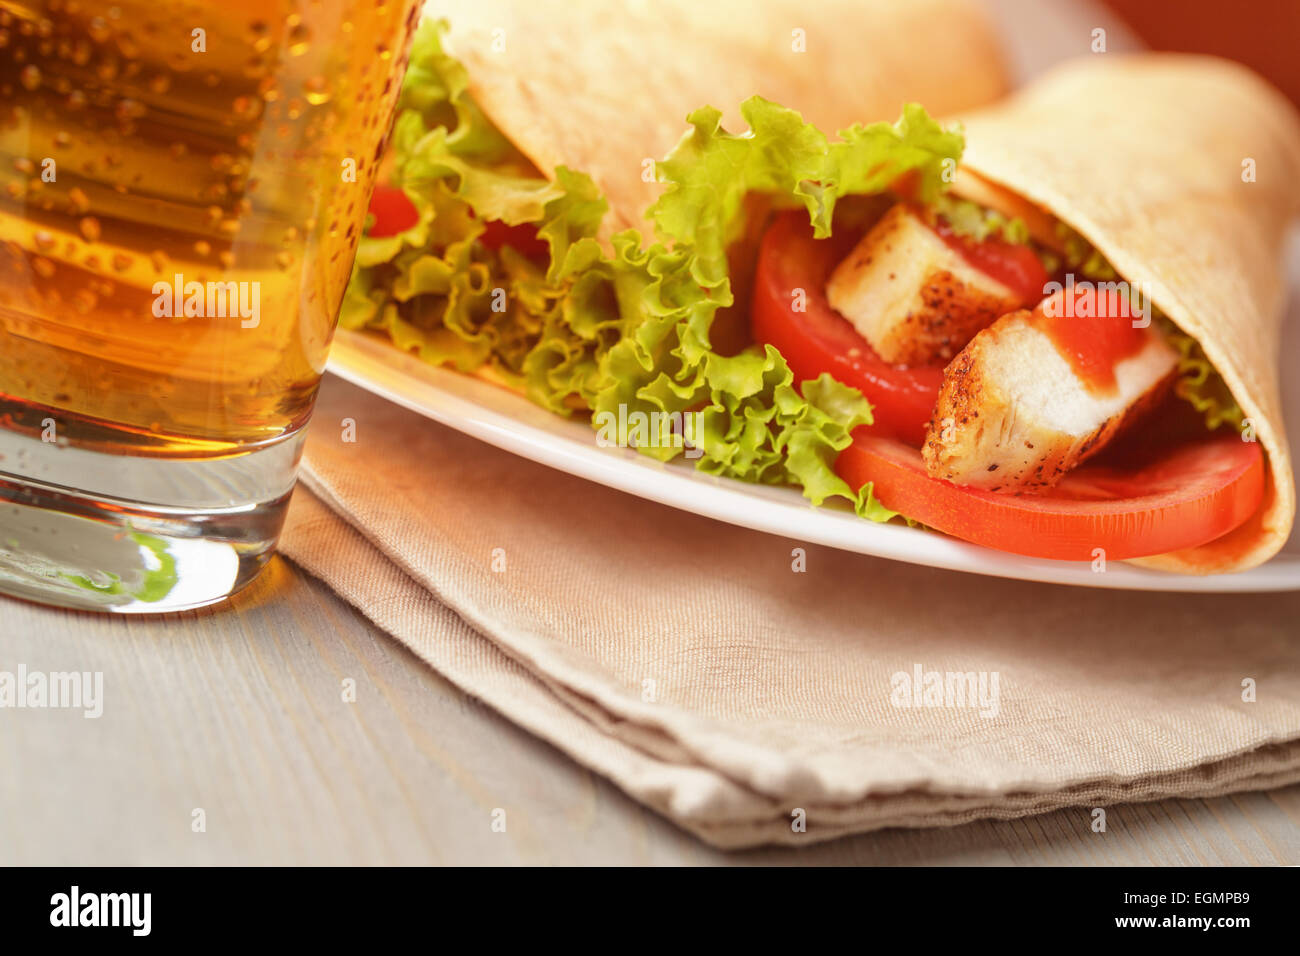 freshly made tortilla wraps with chicken and vegetables Stock Photo